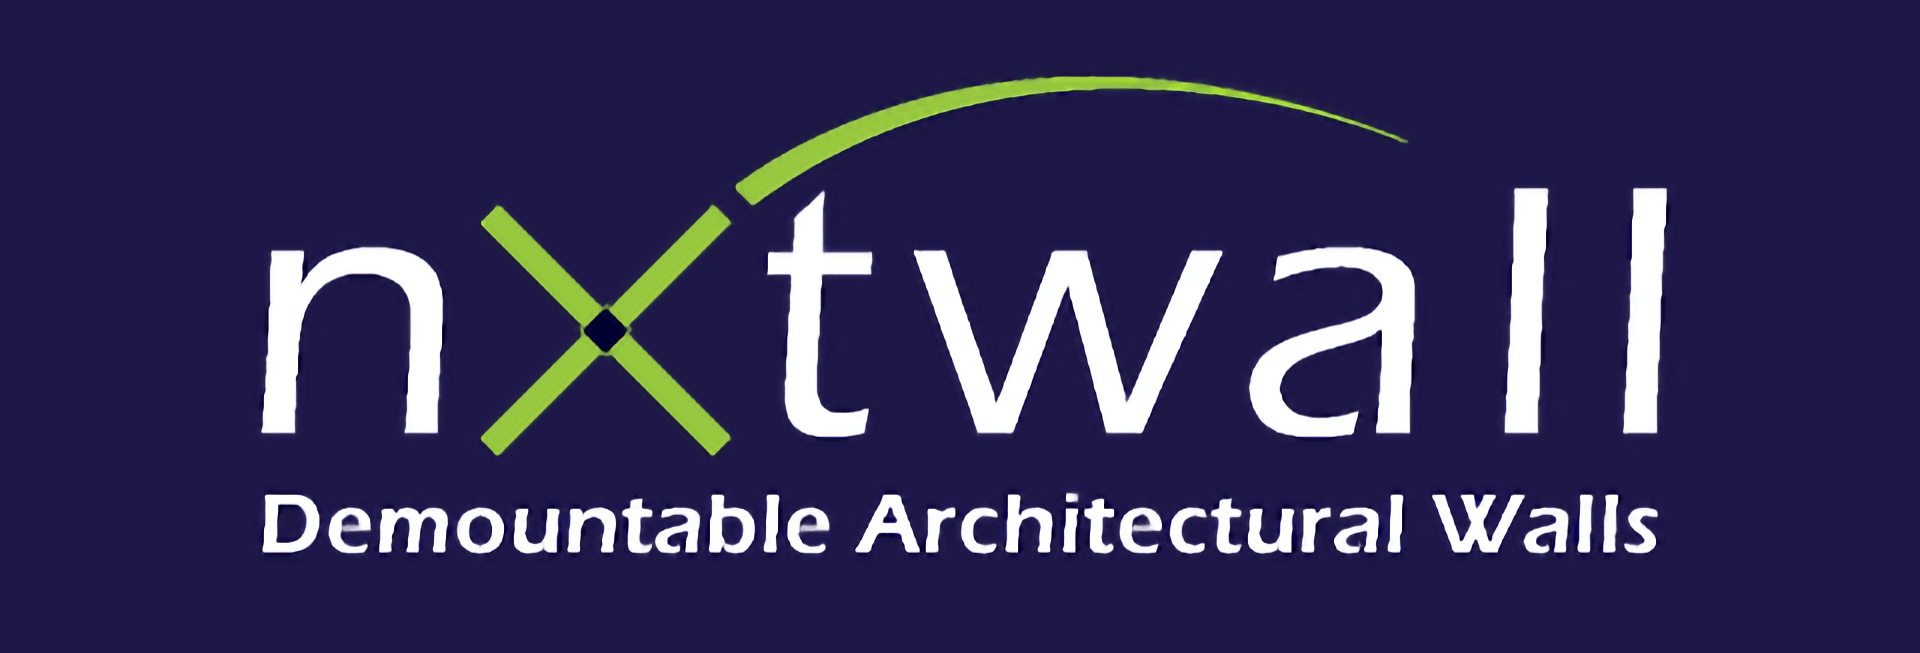 NxtWall Architectural Wall Systems